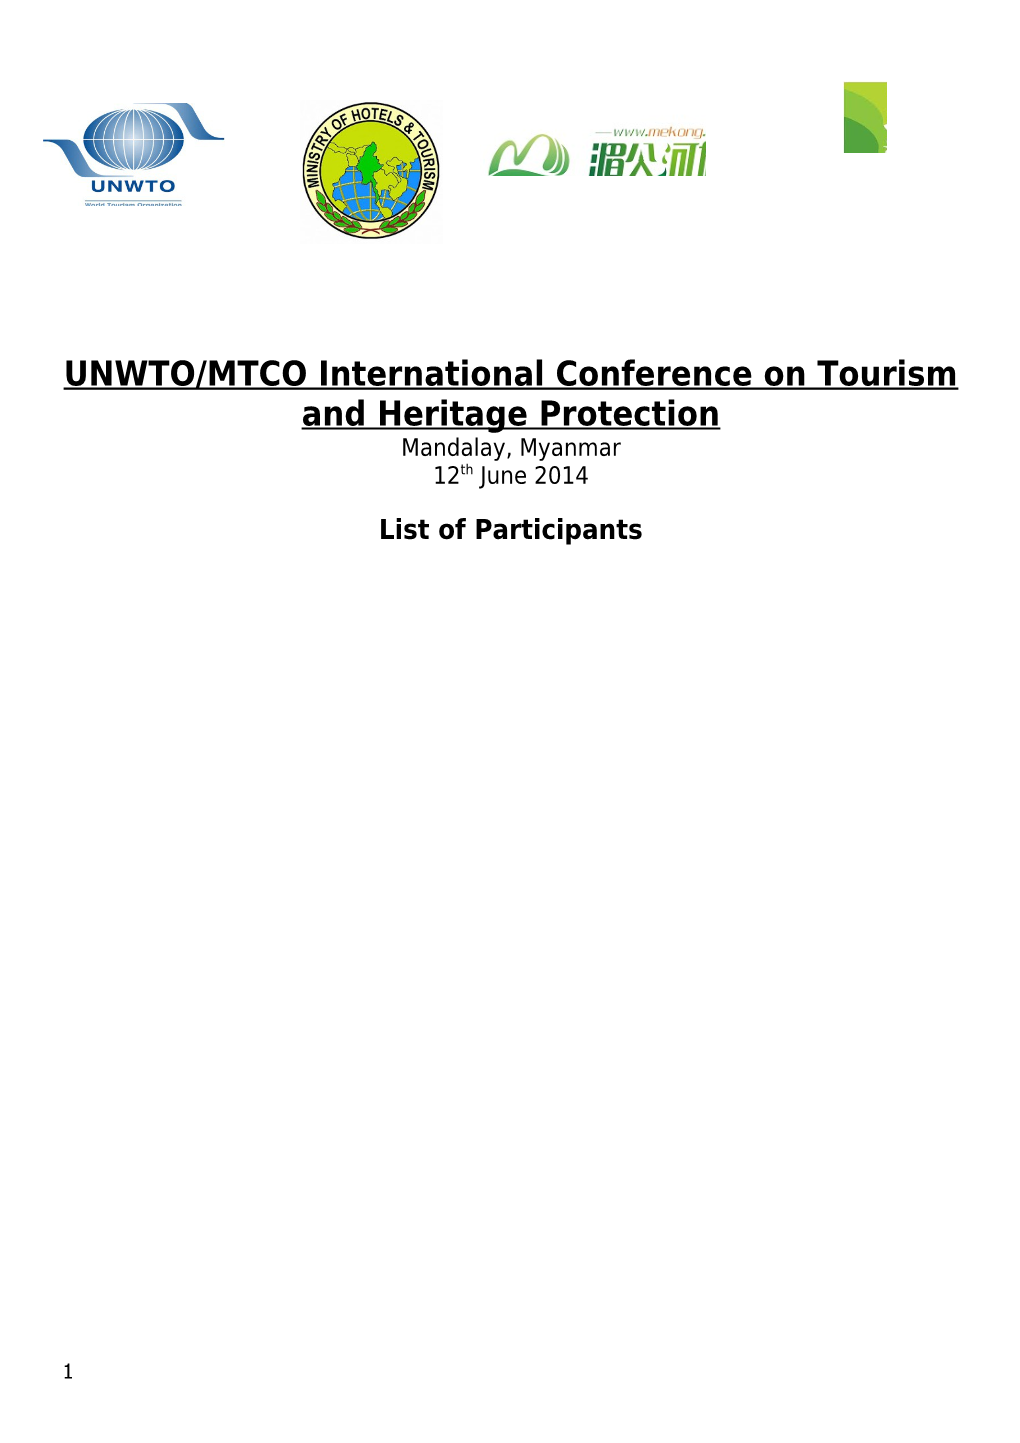 UNWTO/MTCO International Conference on Tourism and Heritage Protection